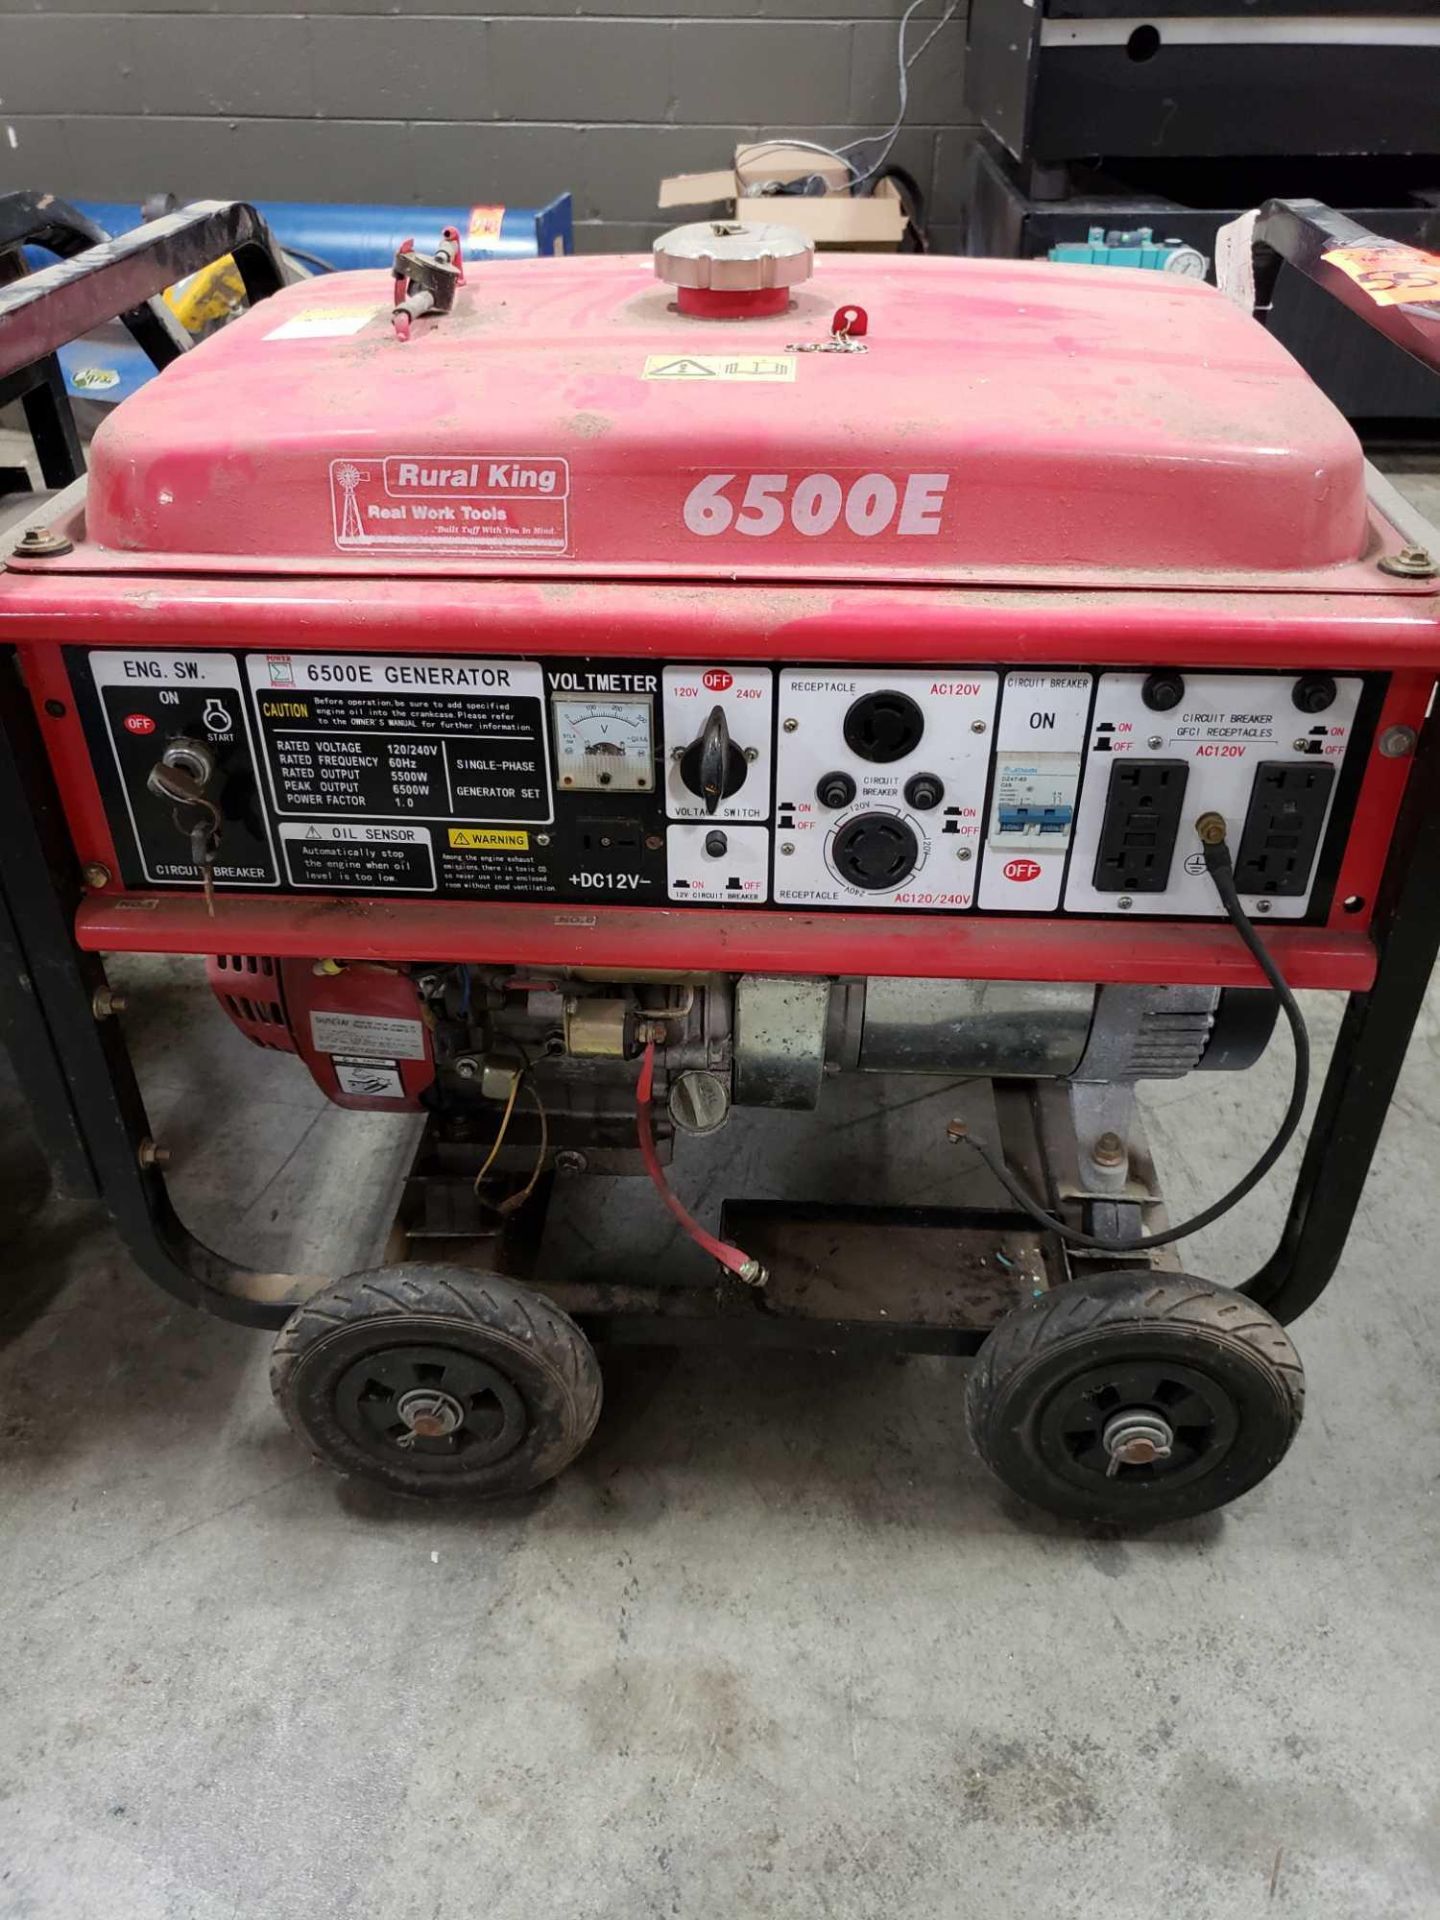 Qty 3 - 6500e gas generator. Consignor states all need work. - Image 3 of 8